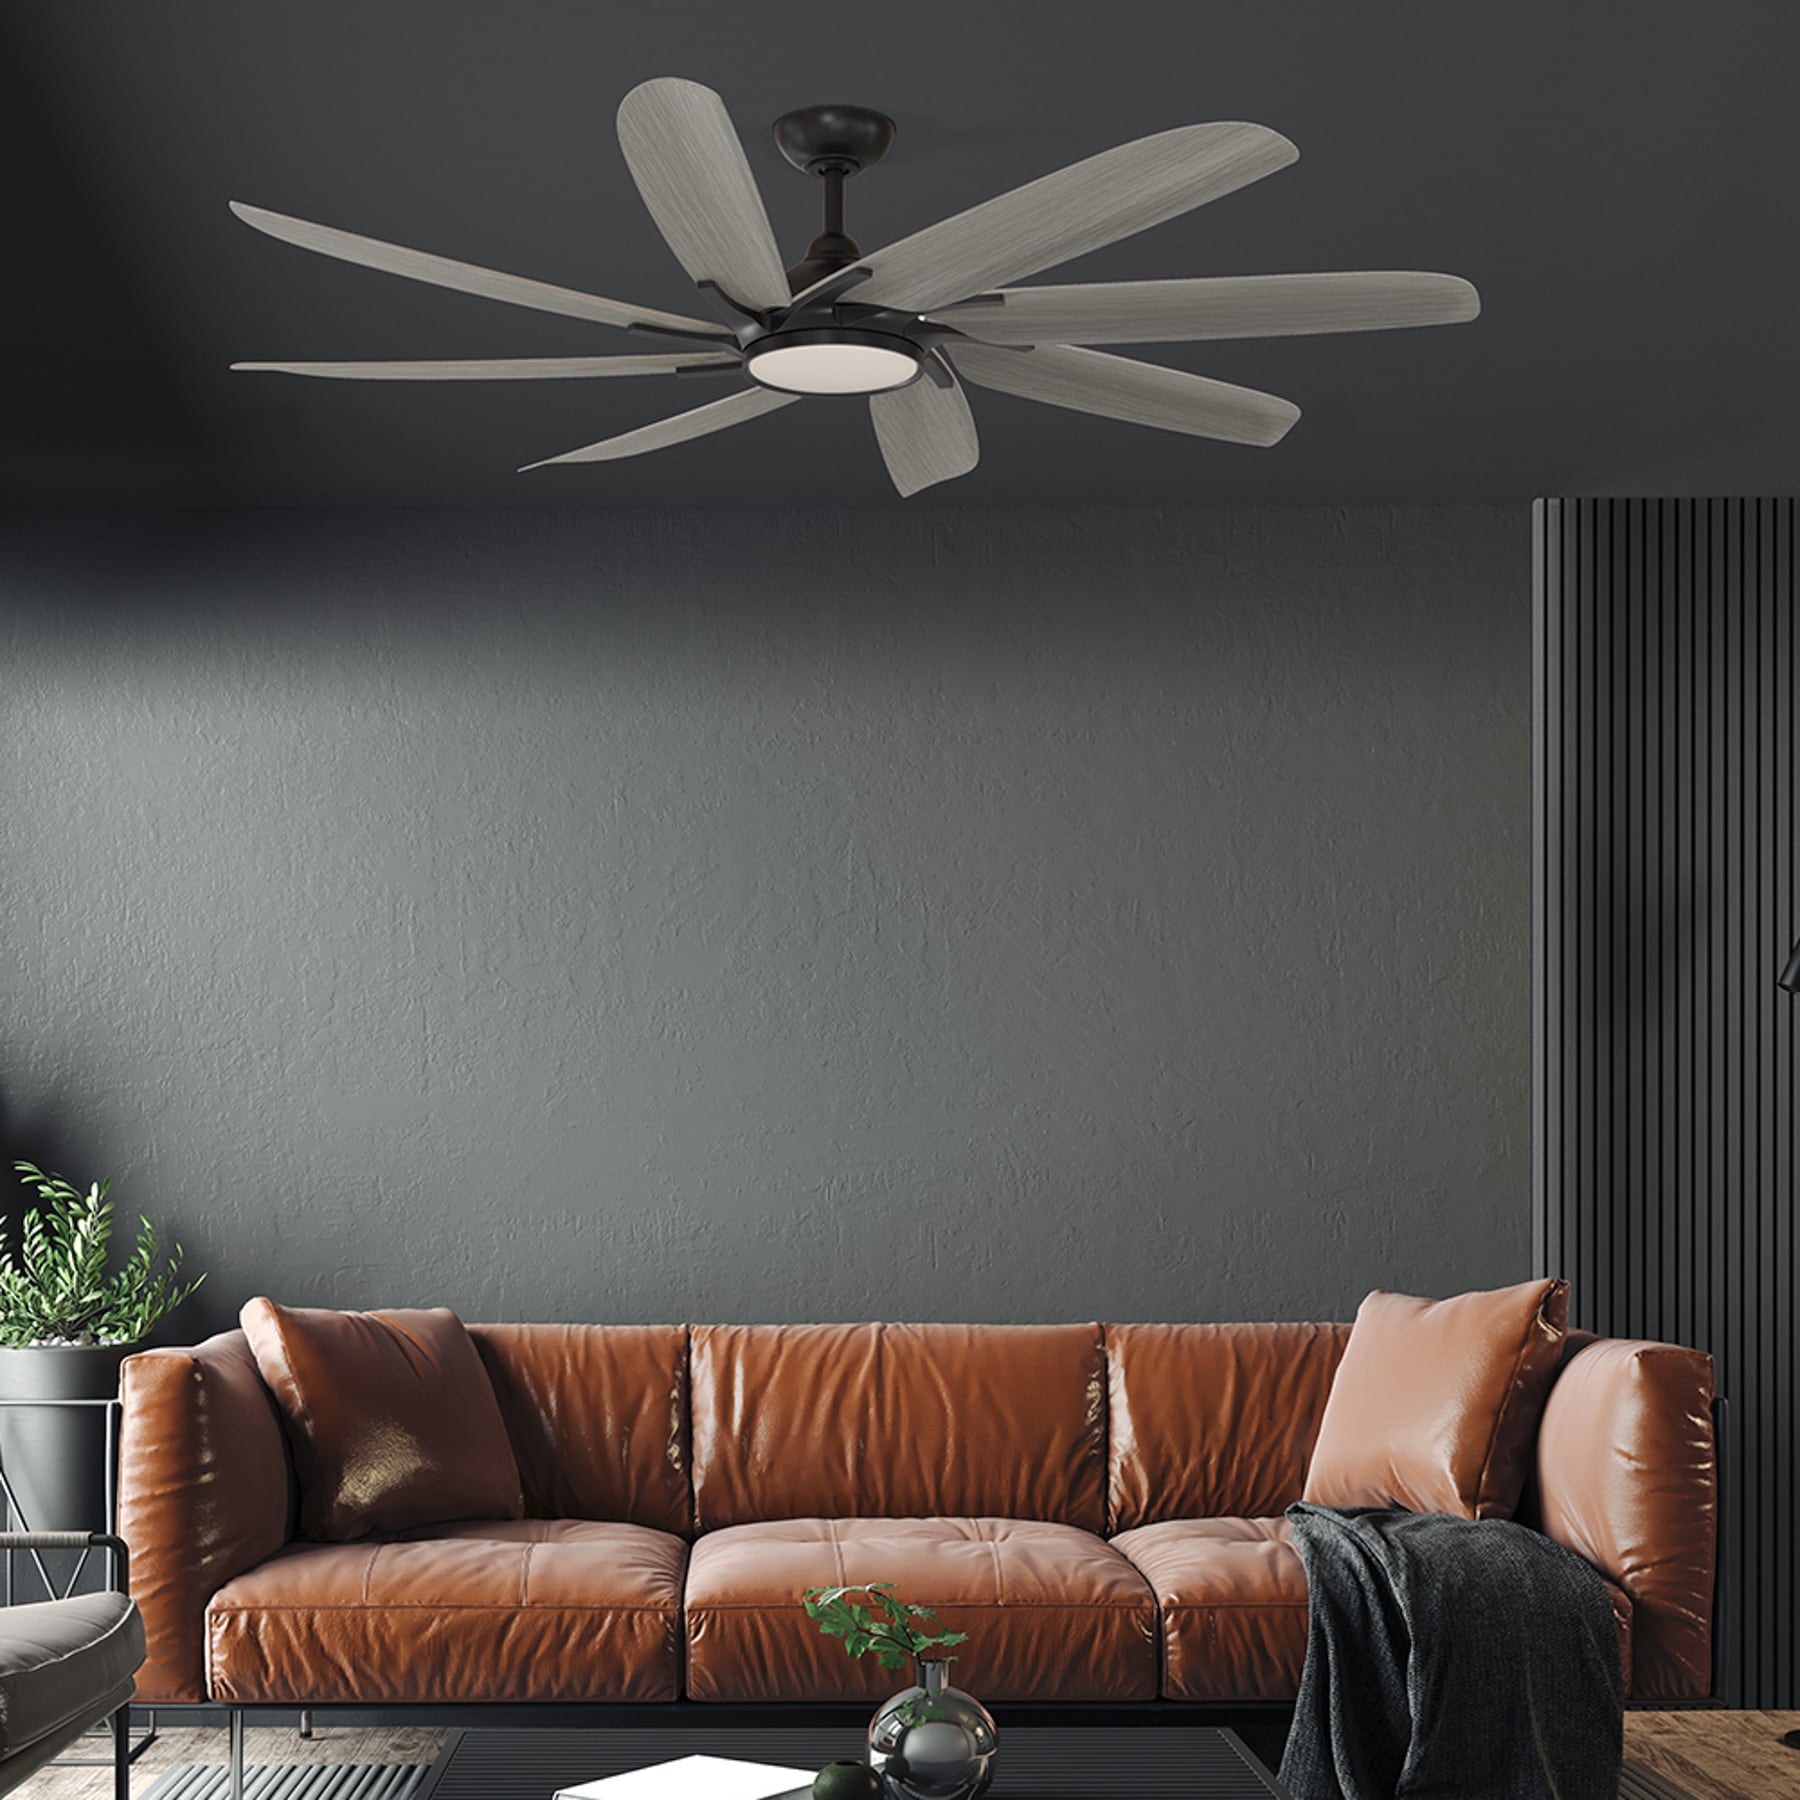 What Color Ceiling Fan For Bedroom